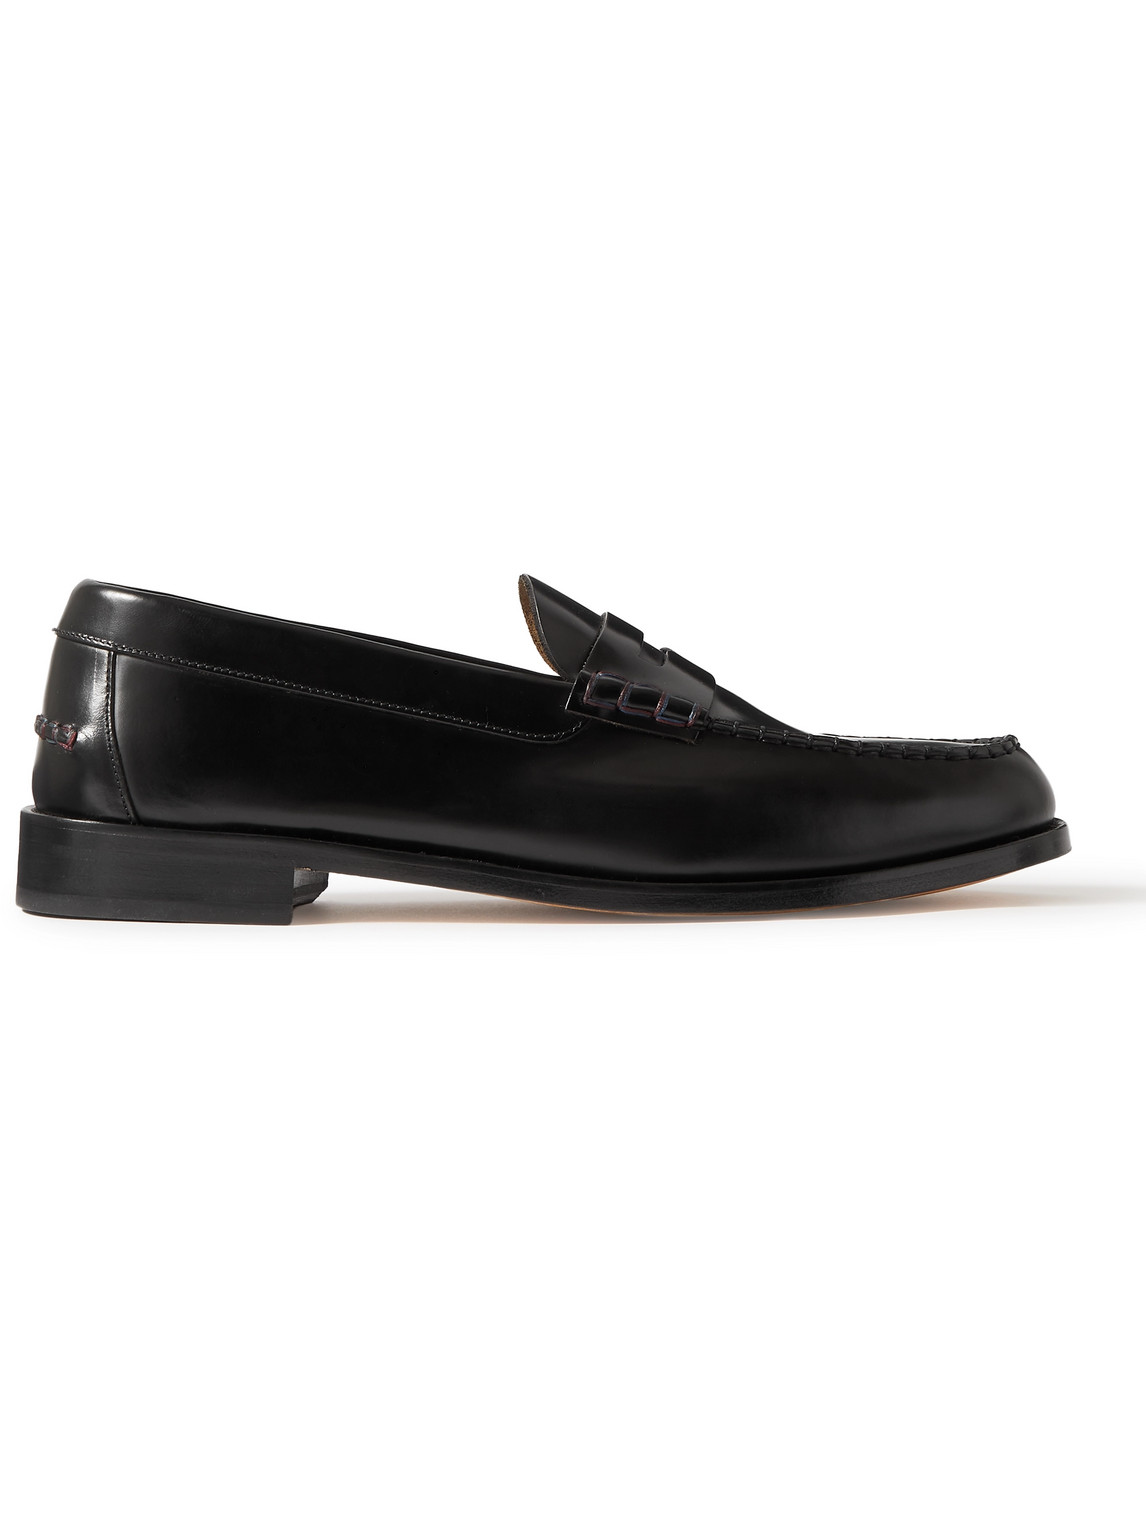 Paul Smith Lido Leather Loafers In Black